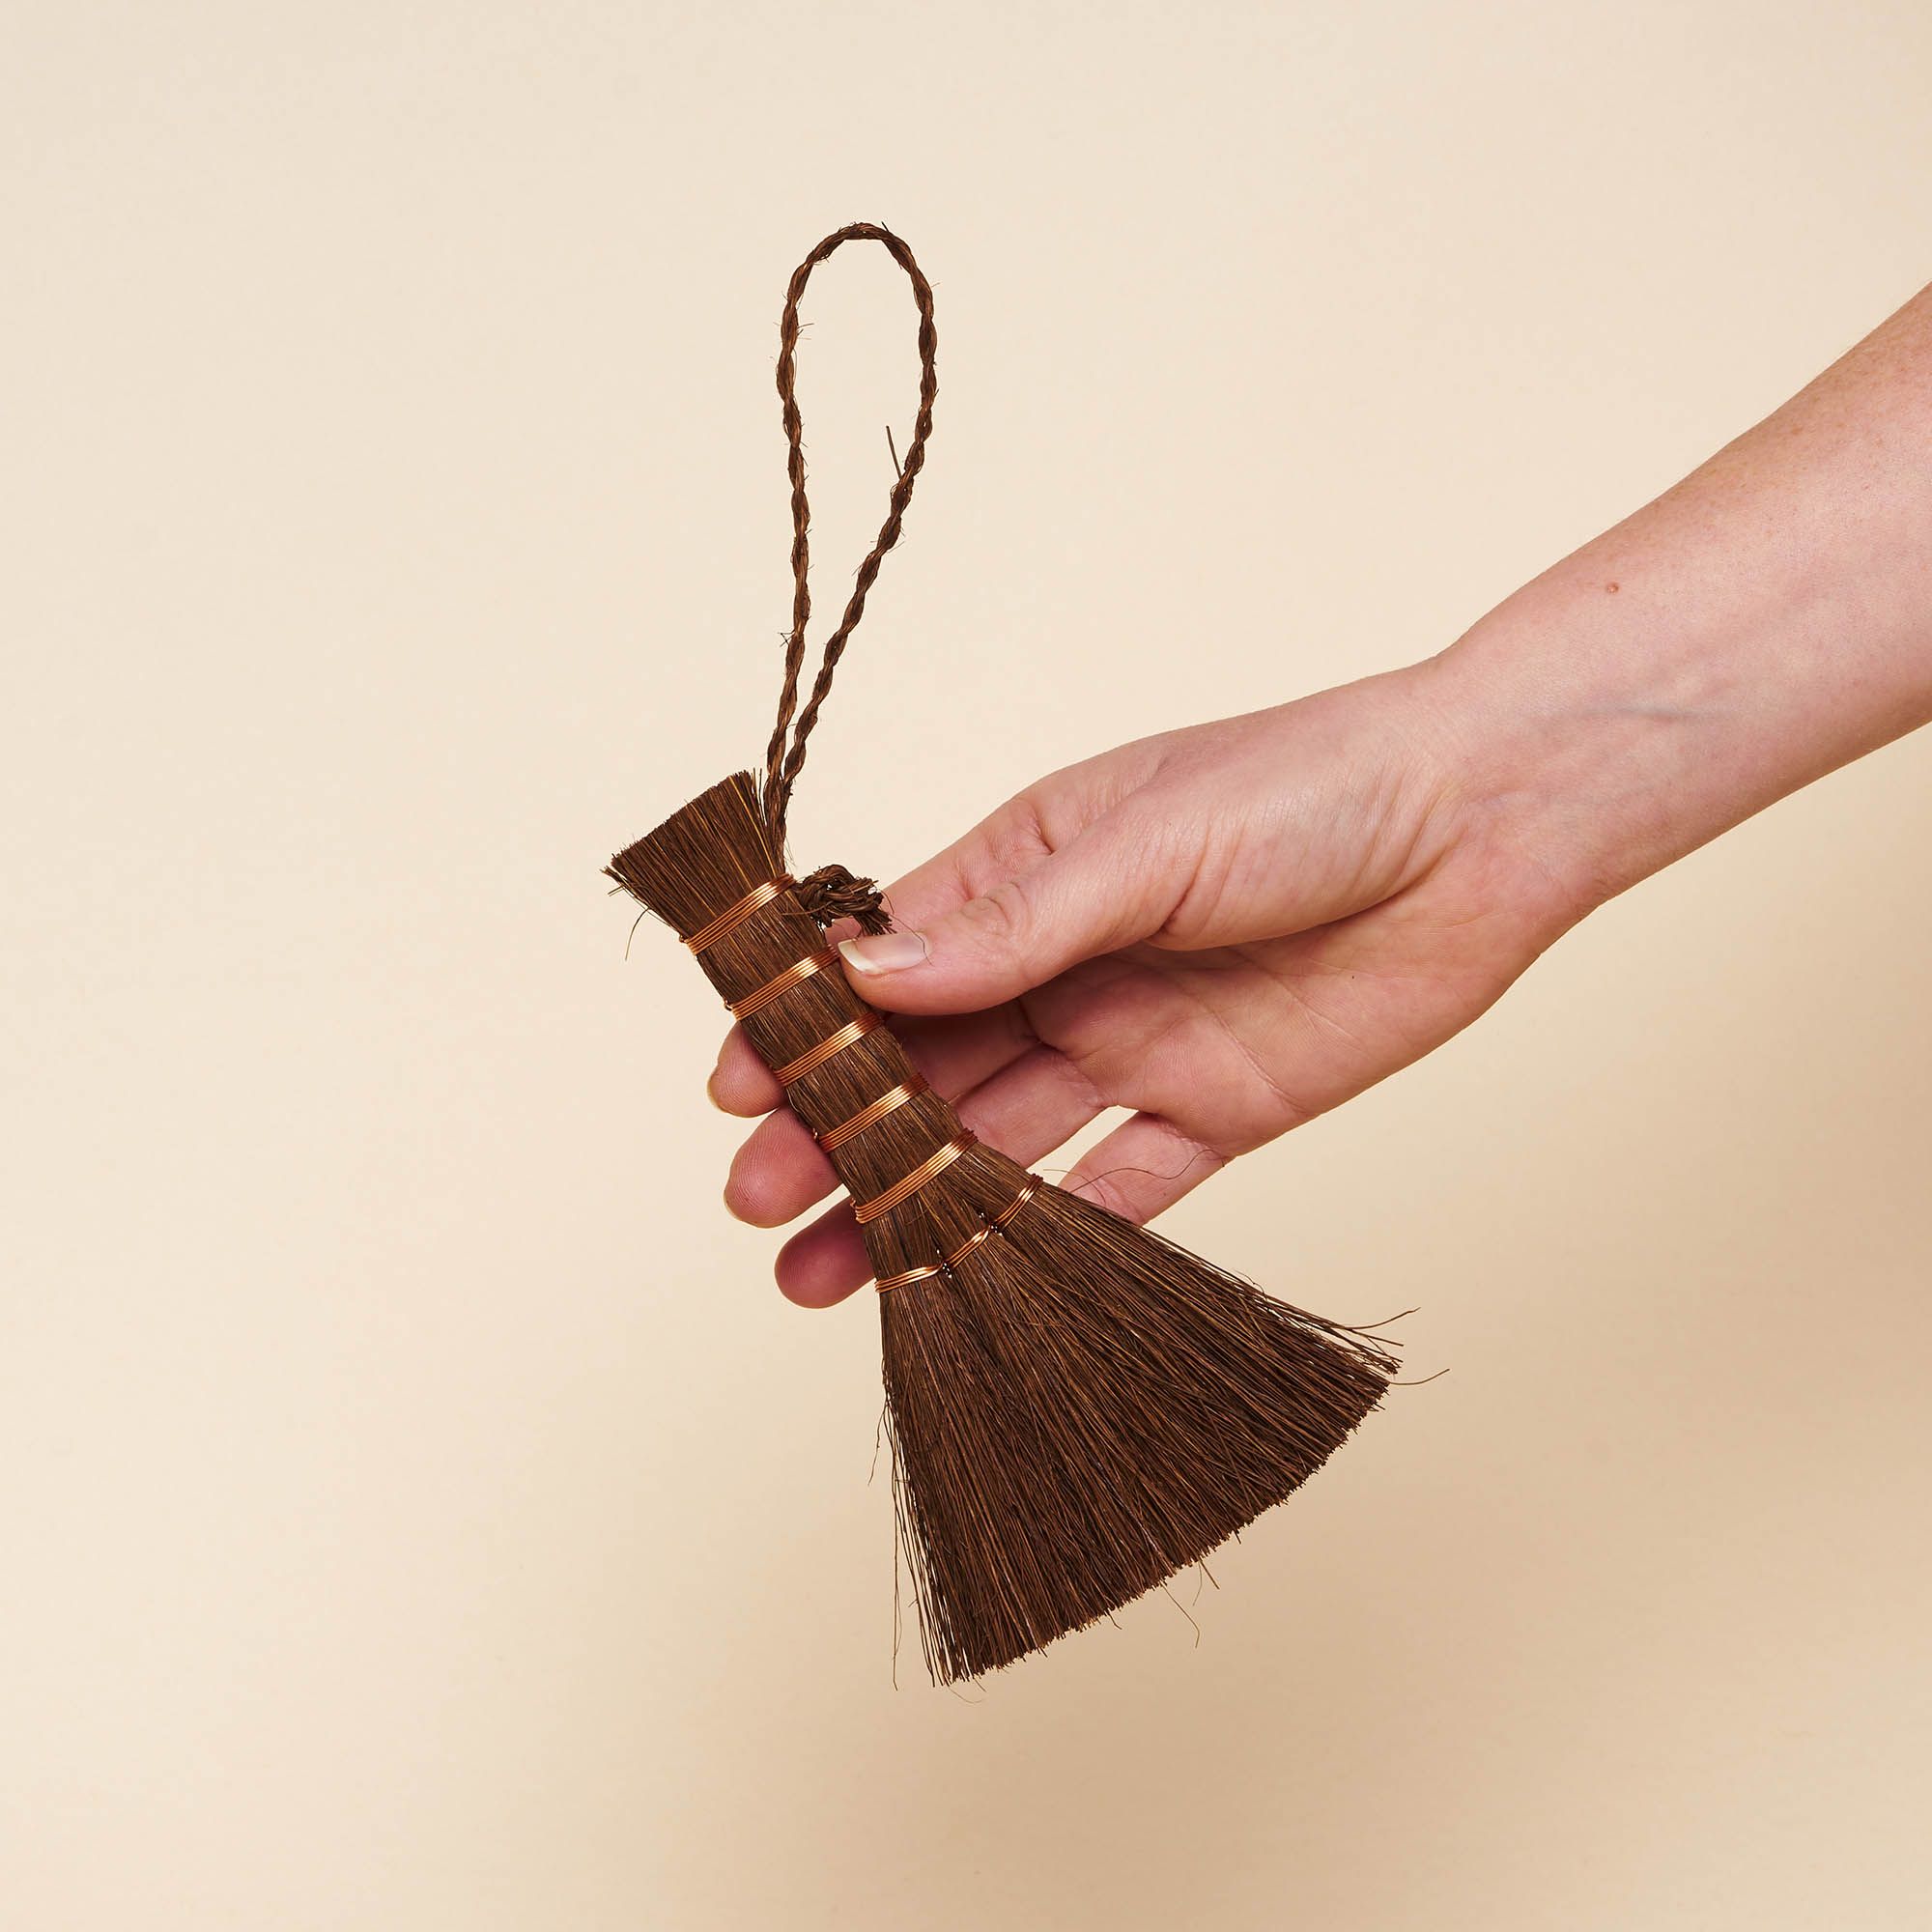 A small hand broom with a palm wooden handle